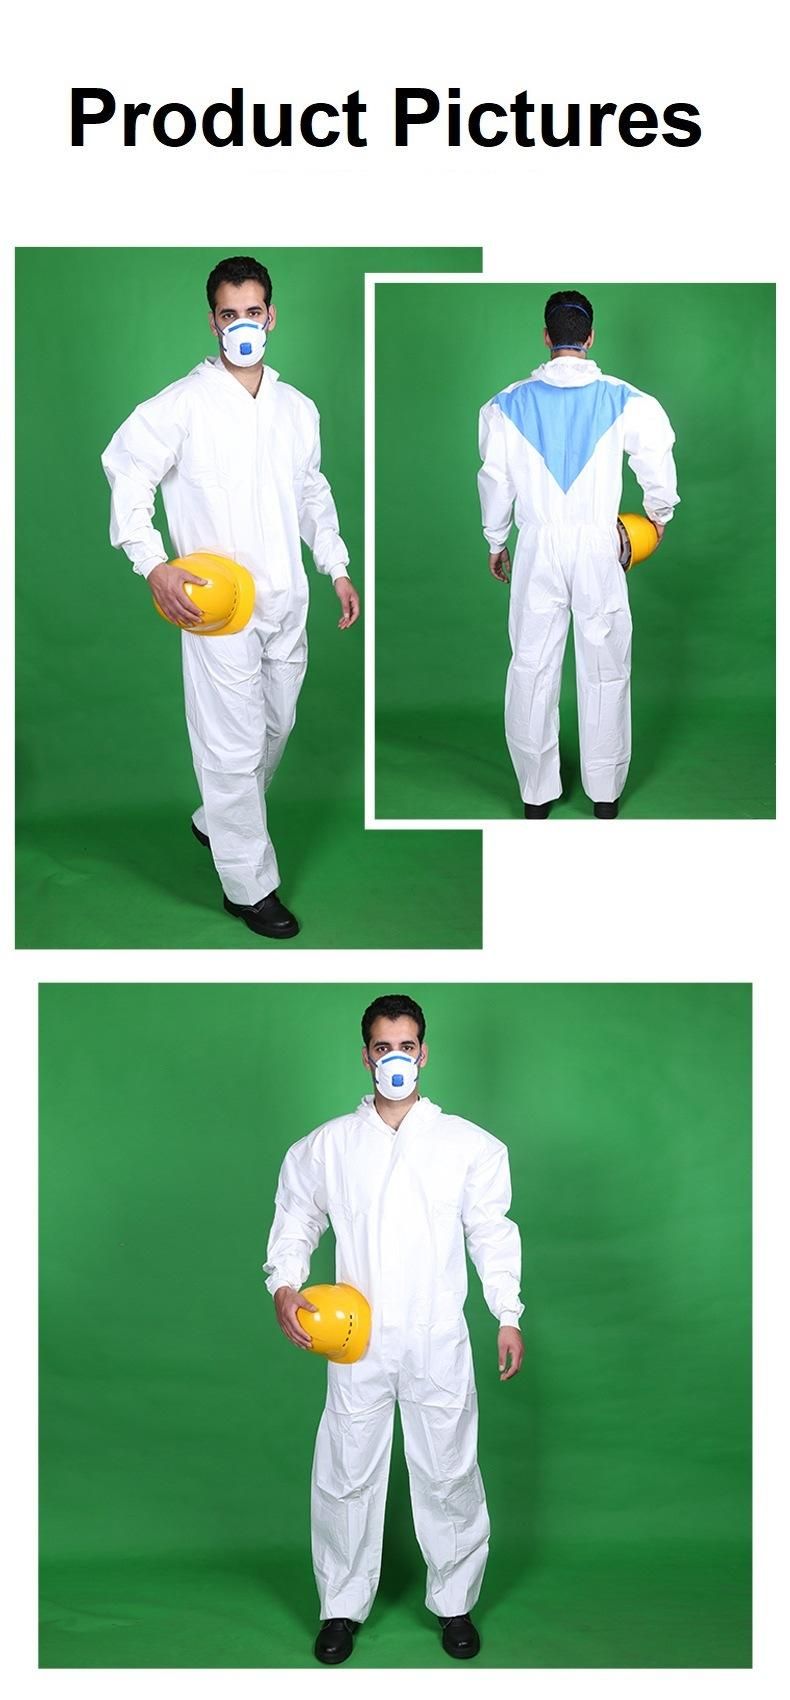 Type 5 6 Nonwoven SMS Safety Isolation Gown Protective Clothing Suit